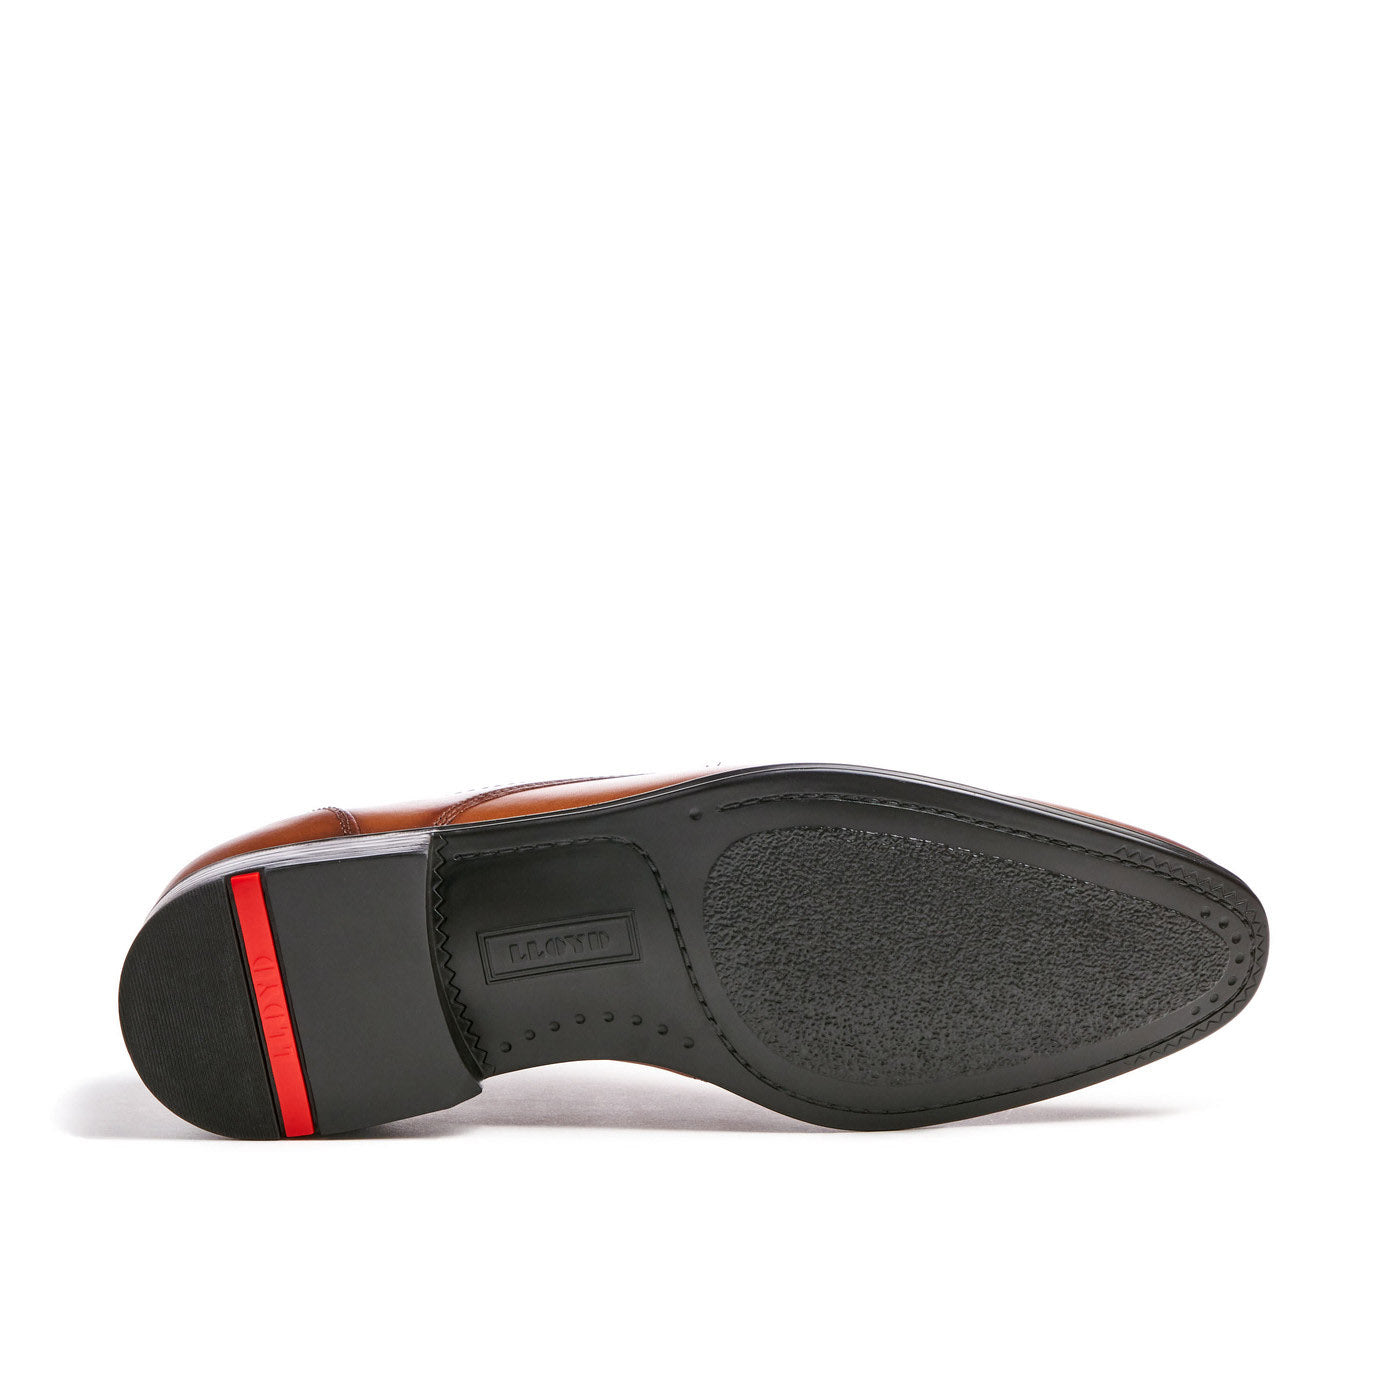 View of the sole with the signature Lloyd red strip on the heel..